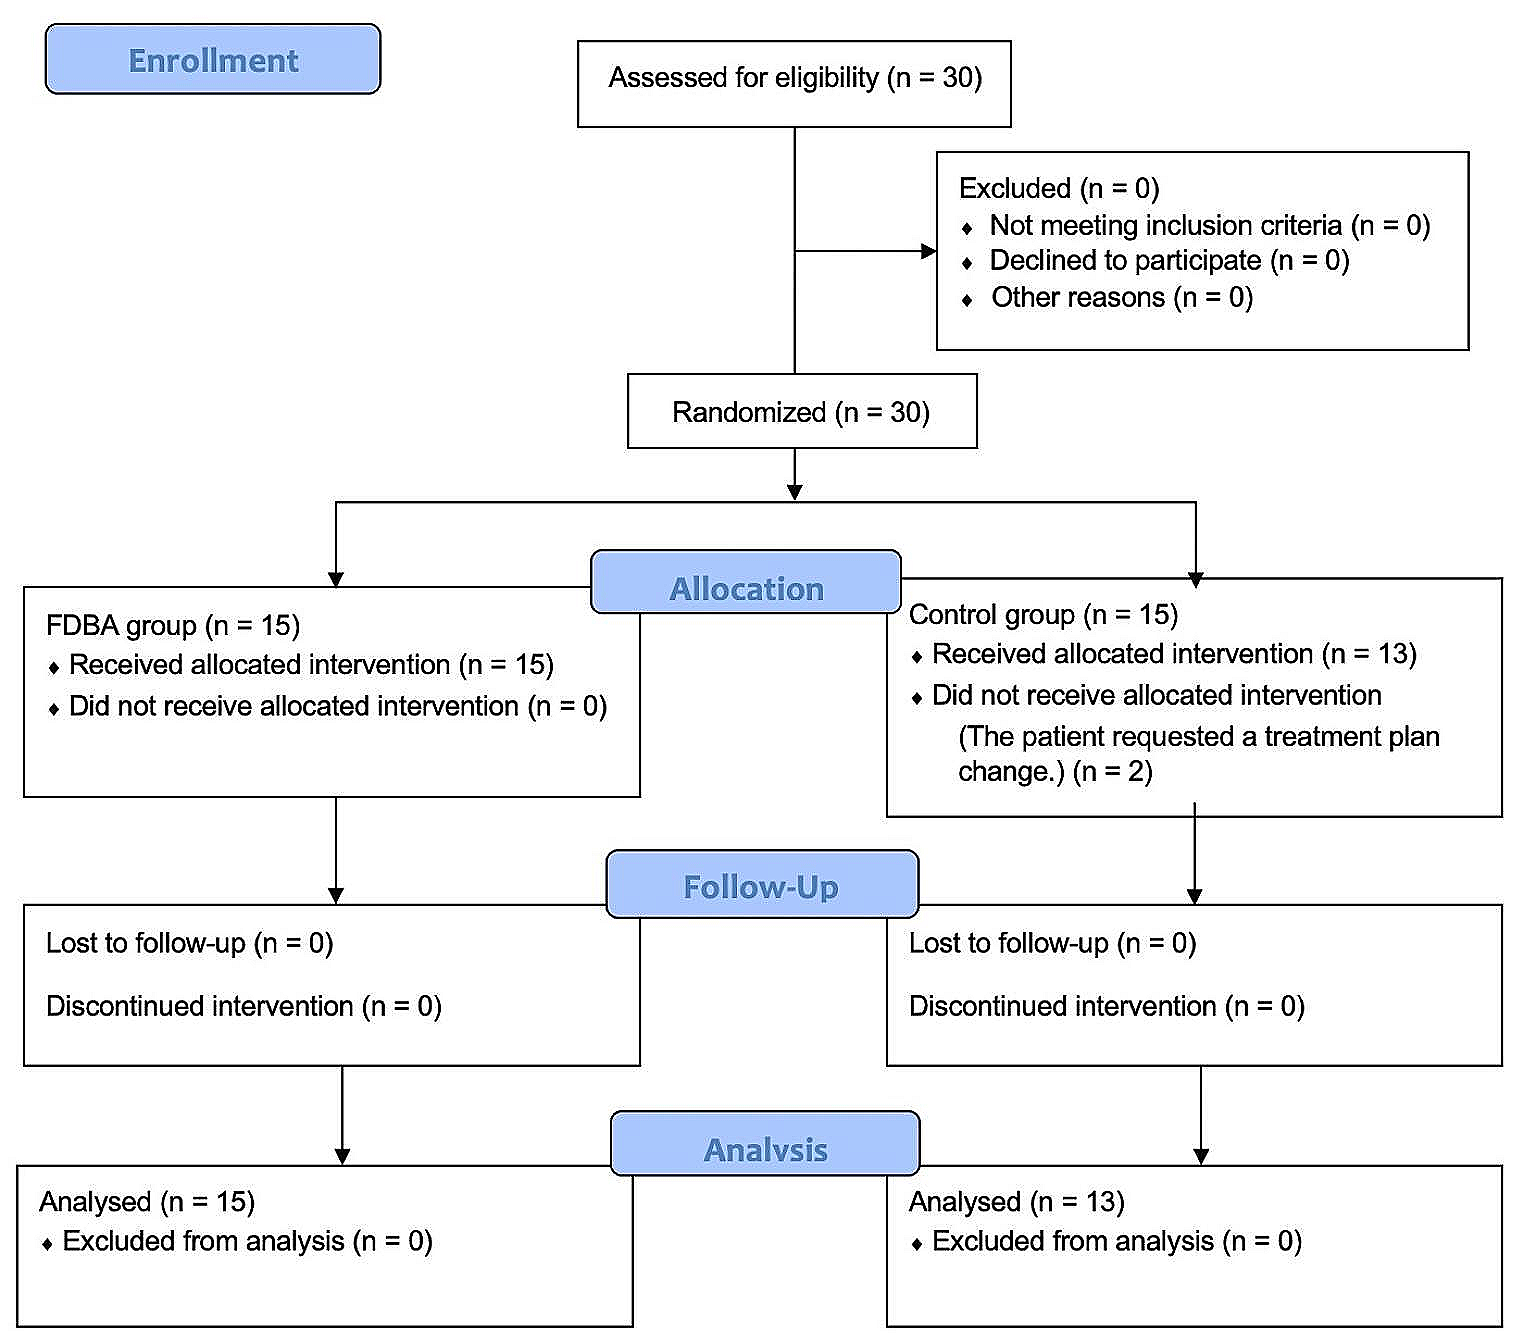 Influence of freeze-dried bone allograft on free gingival graft survival and alveolar ridge maintenance in socket seal procedures: a randomized controlled clinical trial